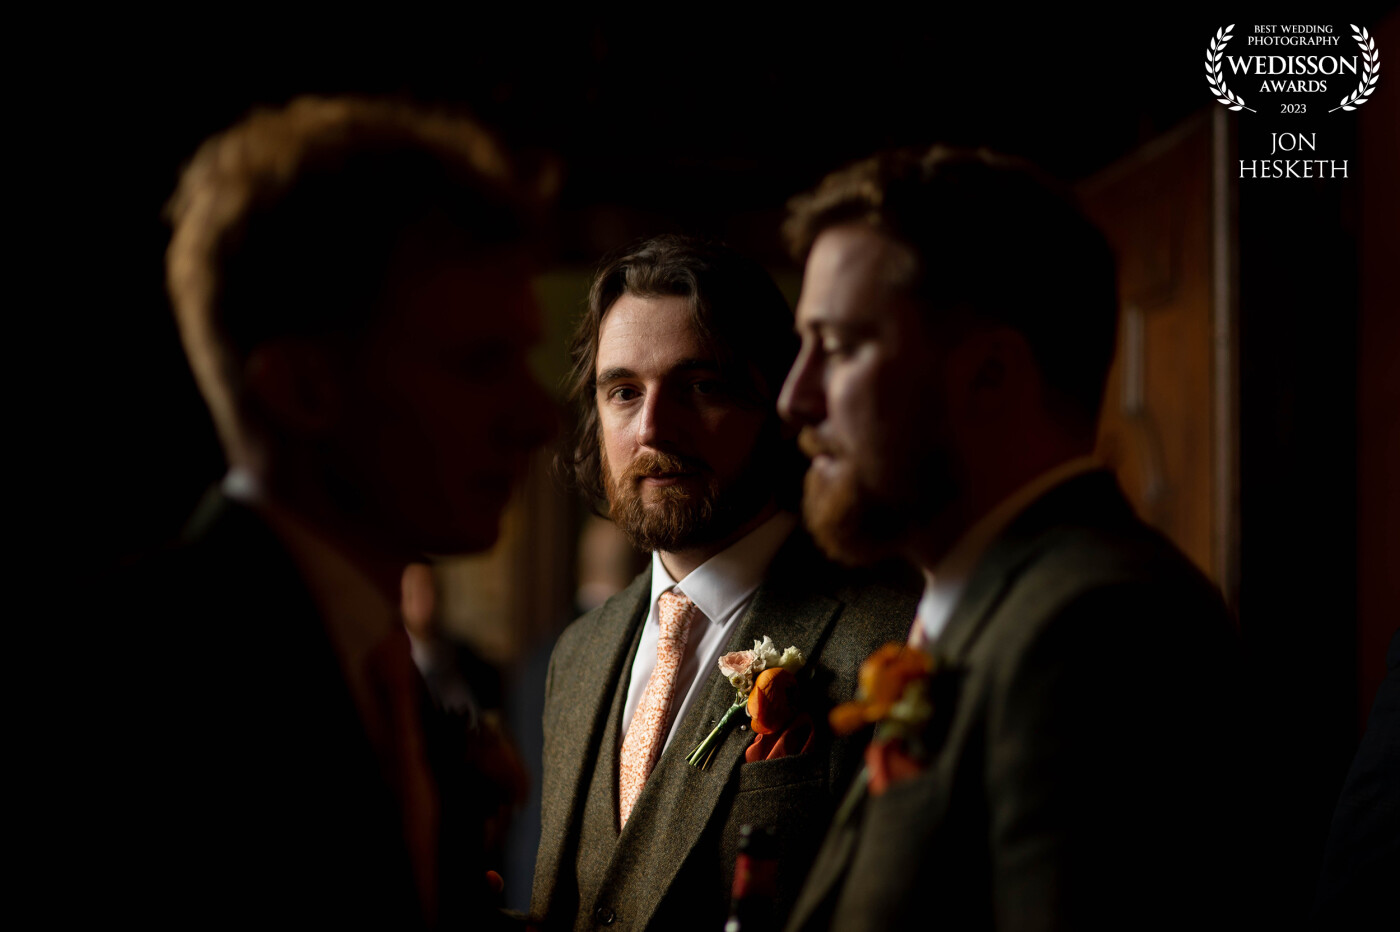 The lighting at this moment with the groomsmen all pensive before walking down the aisle, I was lucky enough to turn around and capture this perfect moment in time.